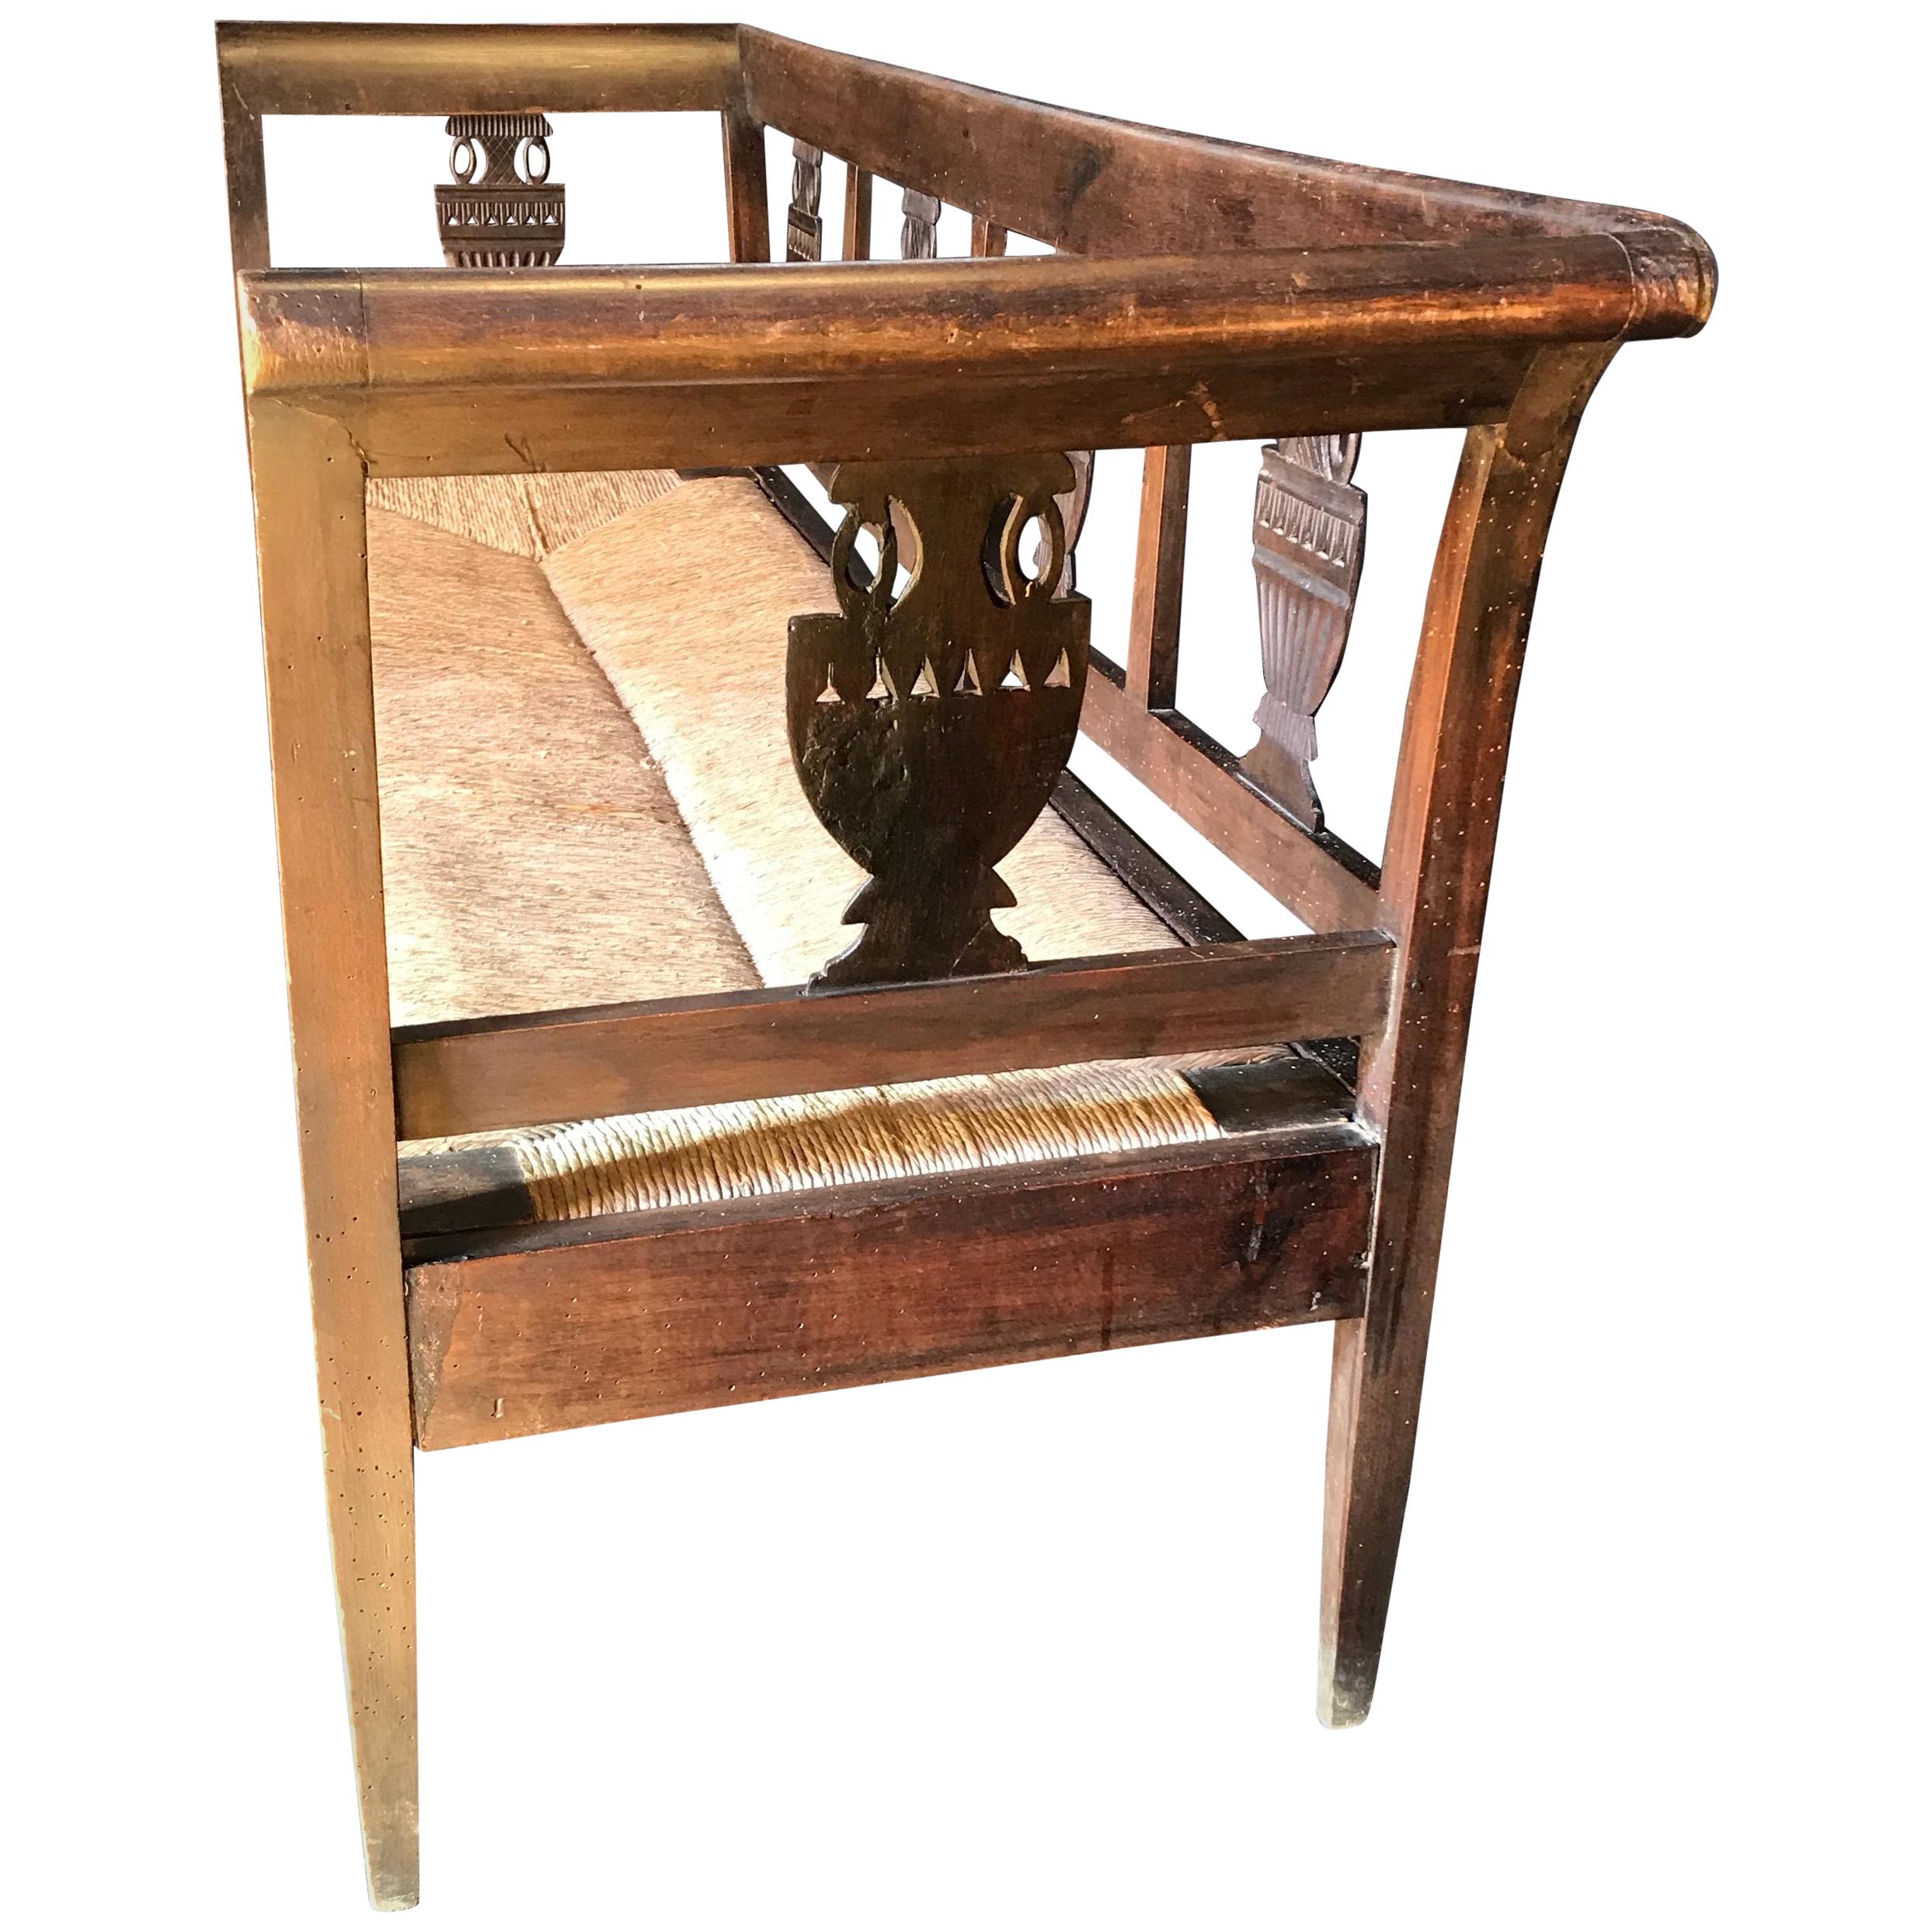 Very elegant walnut French bench having carved decorative urns around the back and sides, 5 legs in front, and handsome rush seat.
seat height 15.5